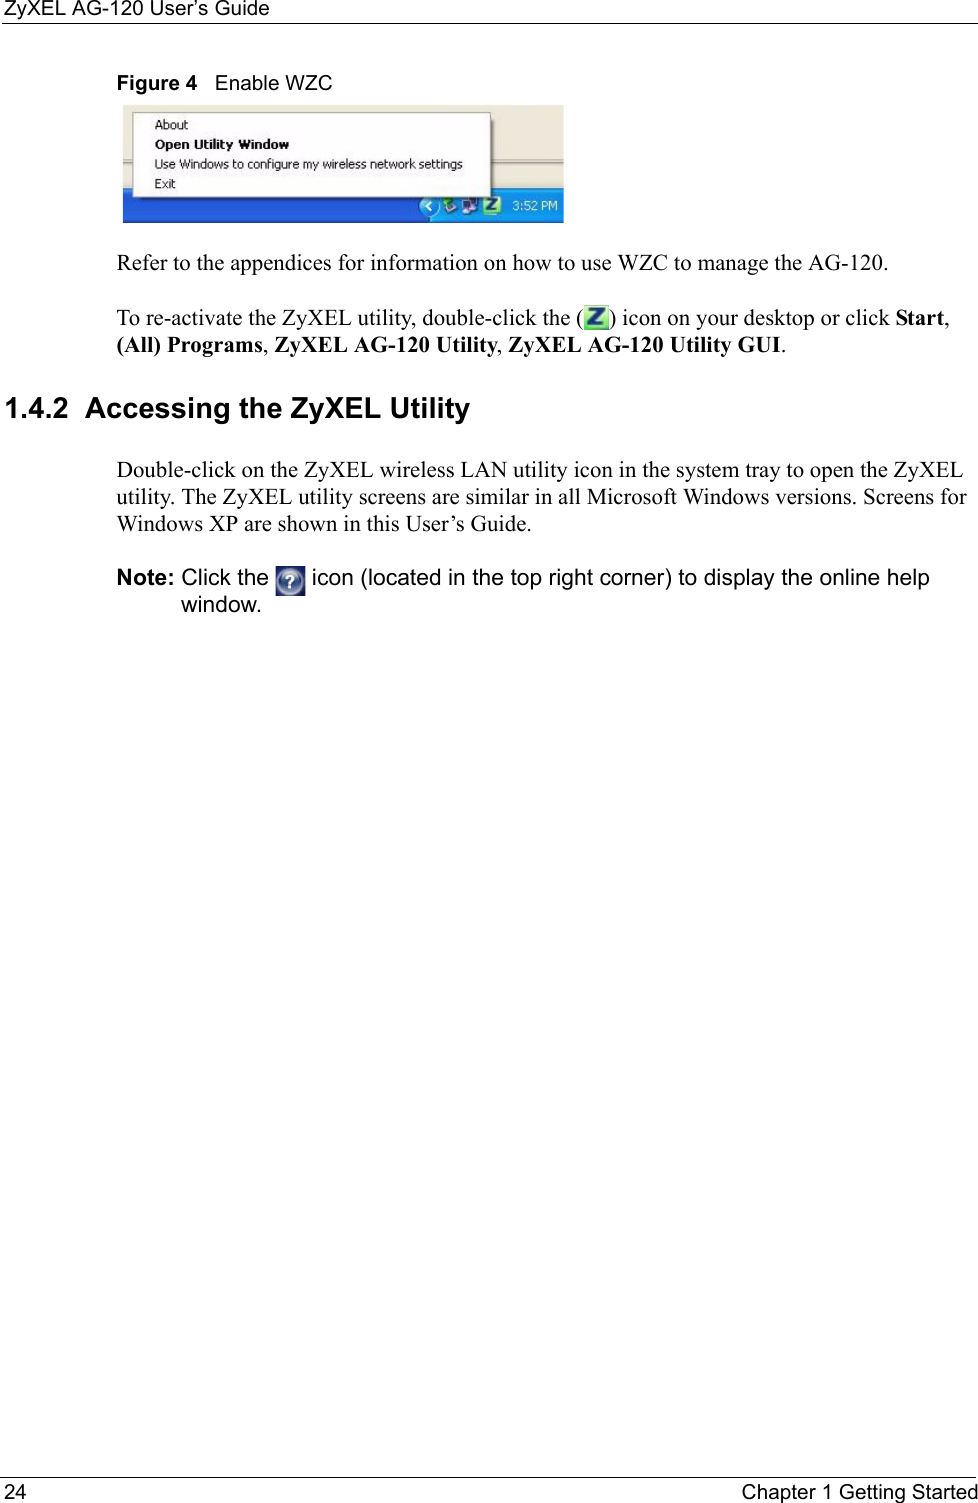 ZyXEL AG-120 User’s Guide24 Chapter 1 Getting StartedFigure 4   Enable WZCRefer to the appendices for information on how to use WZC to manage the AG-120.To re-activate the ZyXEL utility, double-click the ( ) icon on your desktop or click Start, (All) Programs, ZyXEL AG-120 Utility, ZyXEL AG-120 Utility GUI.1.4.2  Accessing the ZyXEL Utility Double-click on the ZyXEL wireless LAN utility icon in the system tray to open the ZyXEL utility. The ZyXEL utility screens are similar in all Microsoft Windows versions. Screens for Windows XP are shown in this User’s Guide. Note: Click the   icon (located in the top right corner) to display the online help window.